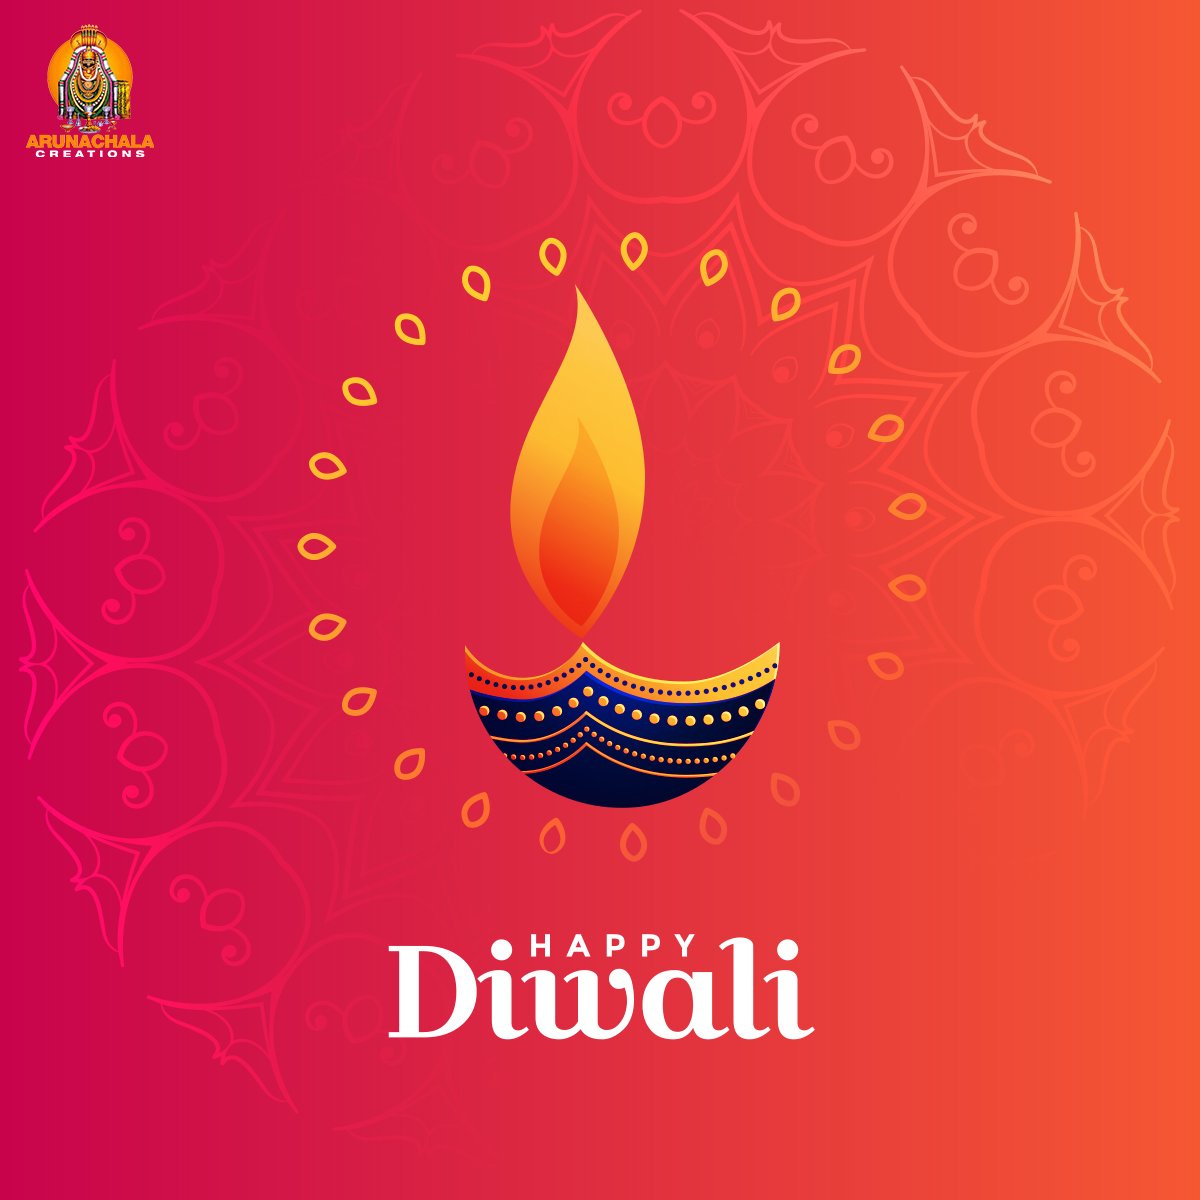 A very Happy Diwali to you all. May the festival of lights bring you peace, joy and prosperity. ✨ #HappyDeepavali